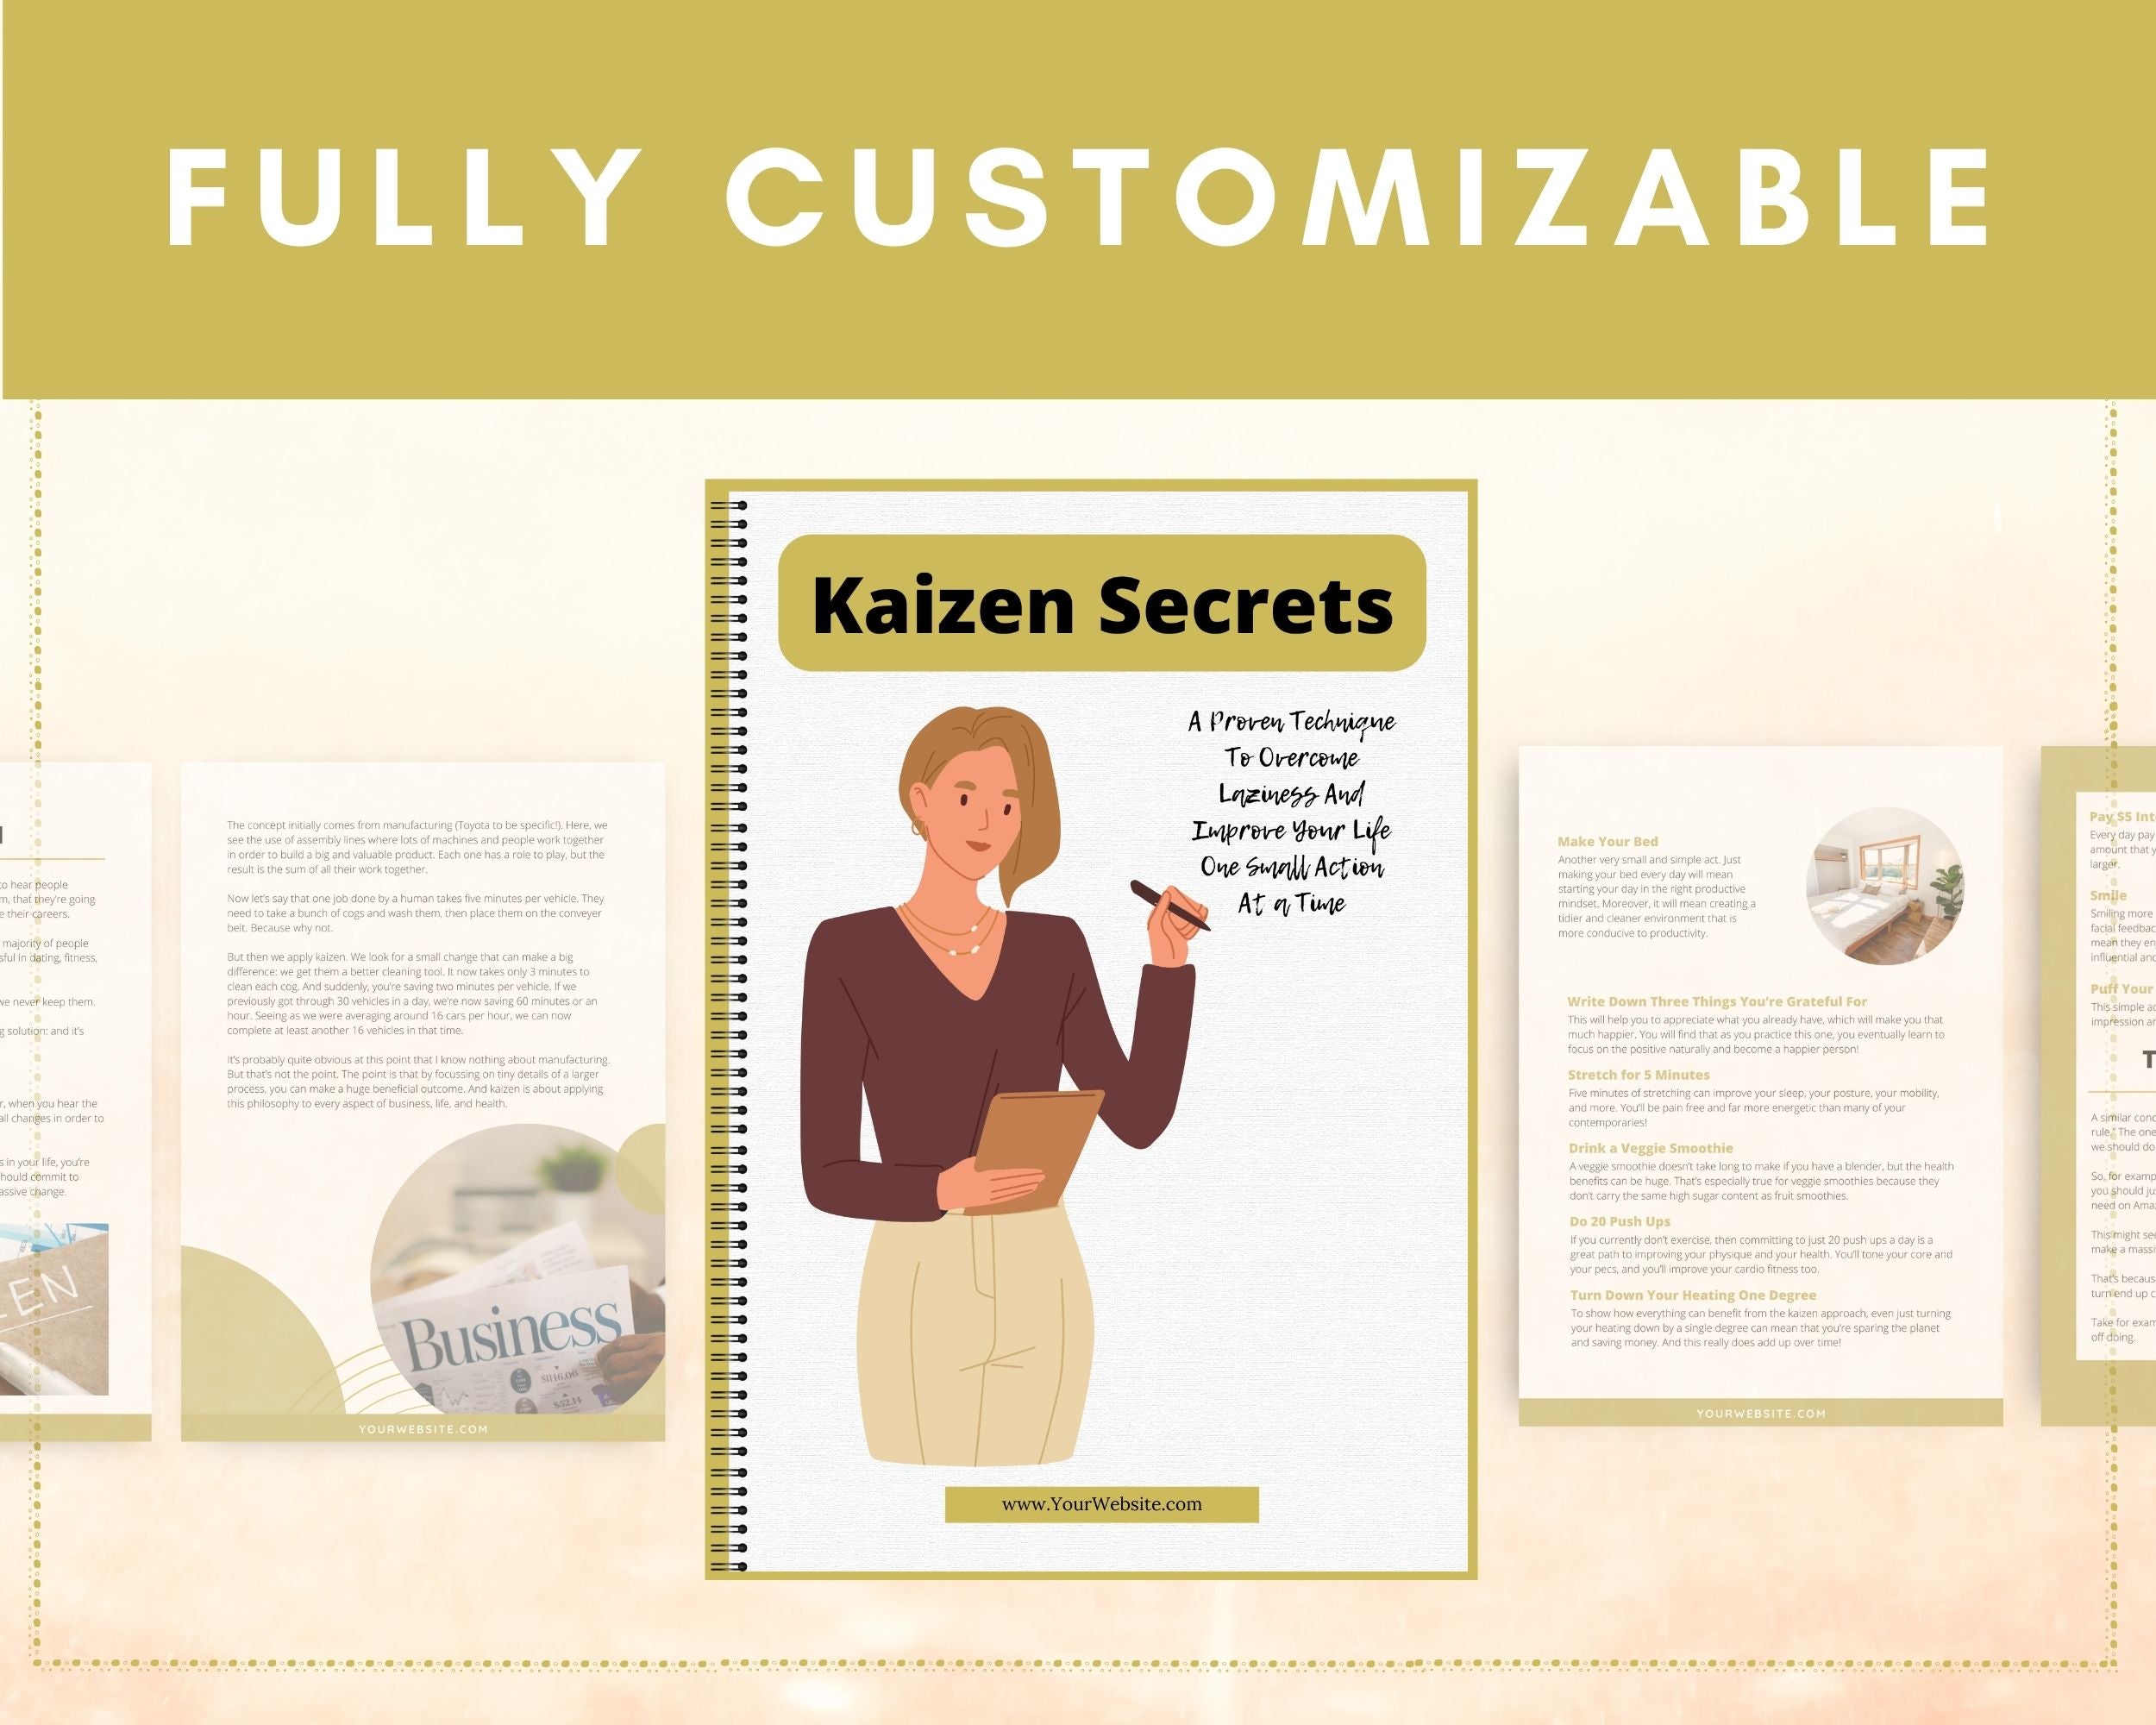 Editable Kaizen Secrets Mini Ebook | Done-for-You Ebook in Canva | Rebrandable and Resizable Canva Template